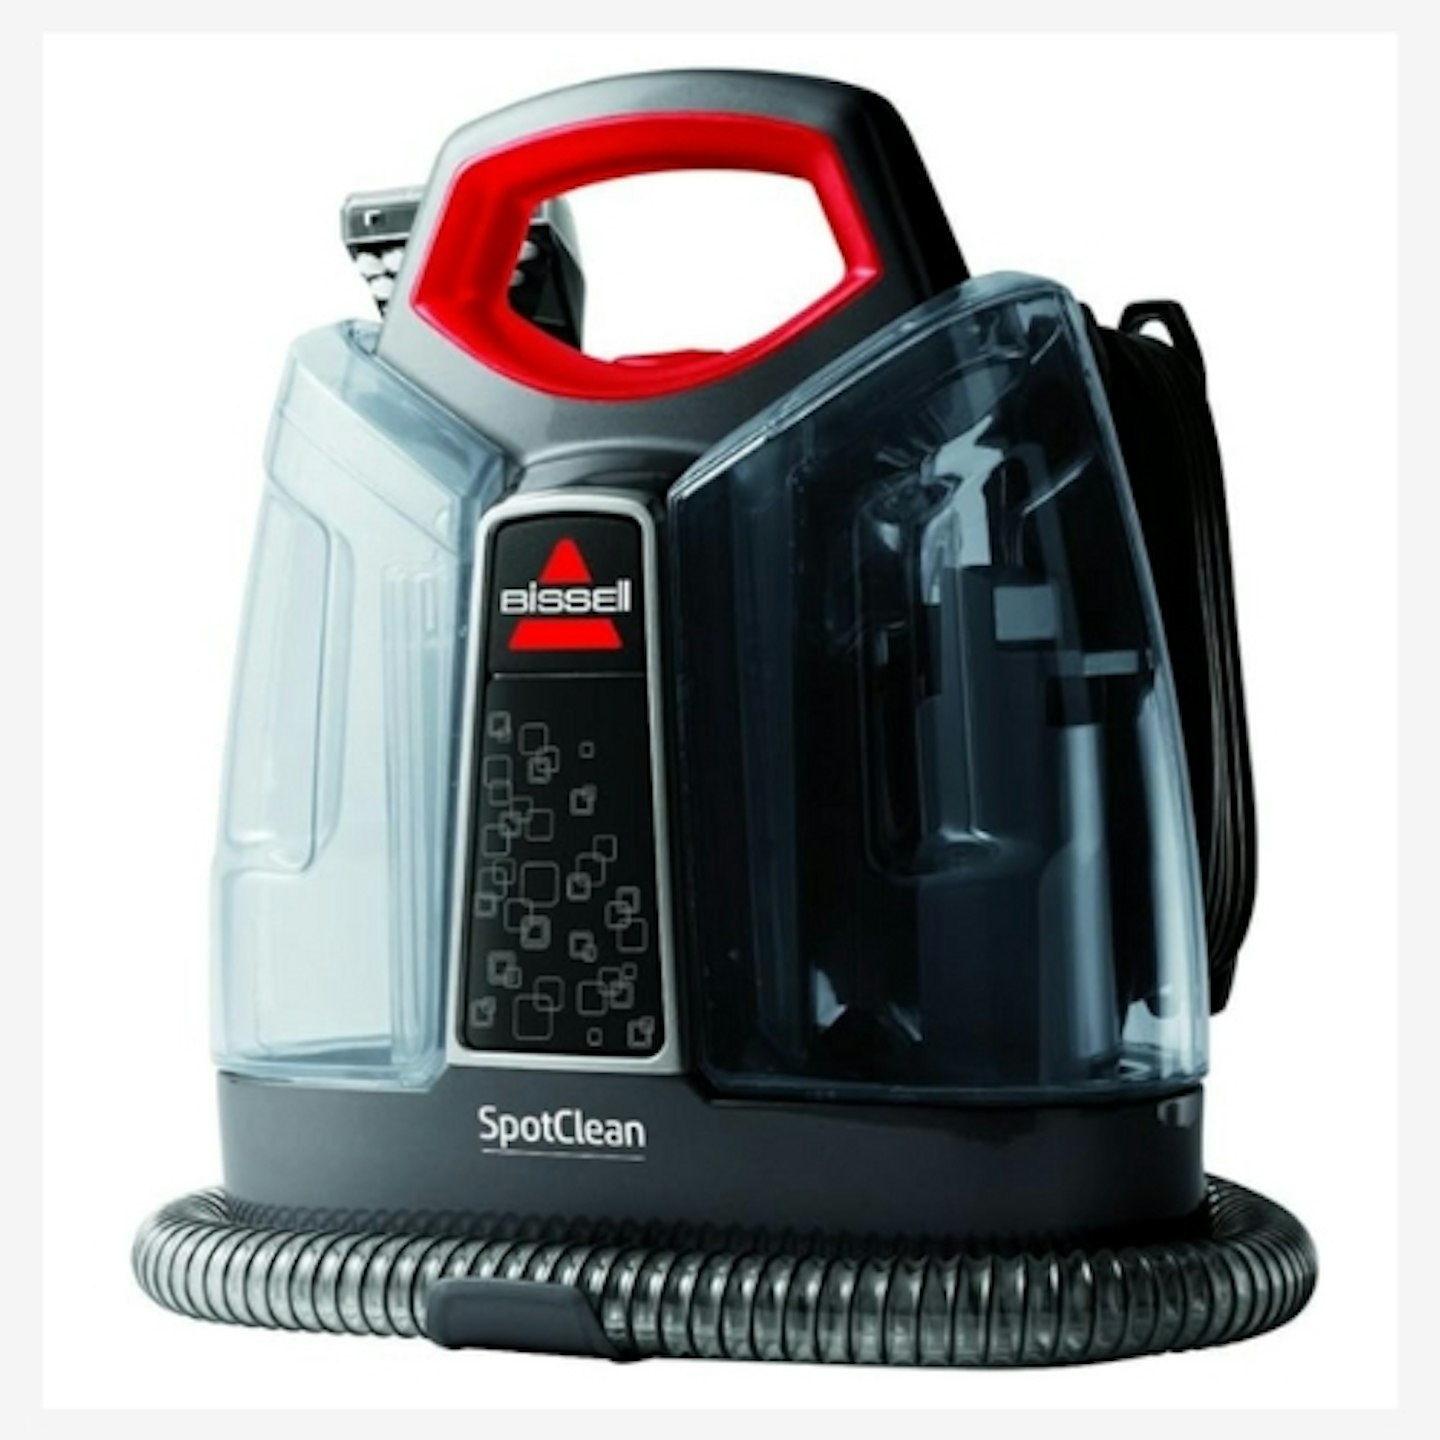 BISSELL SpotClean | Portable Carpet Cleaner